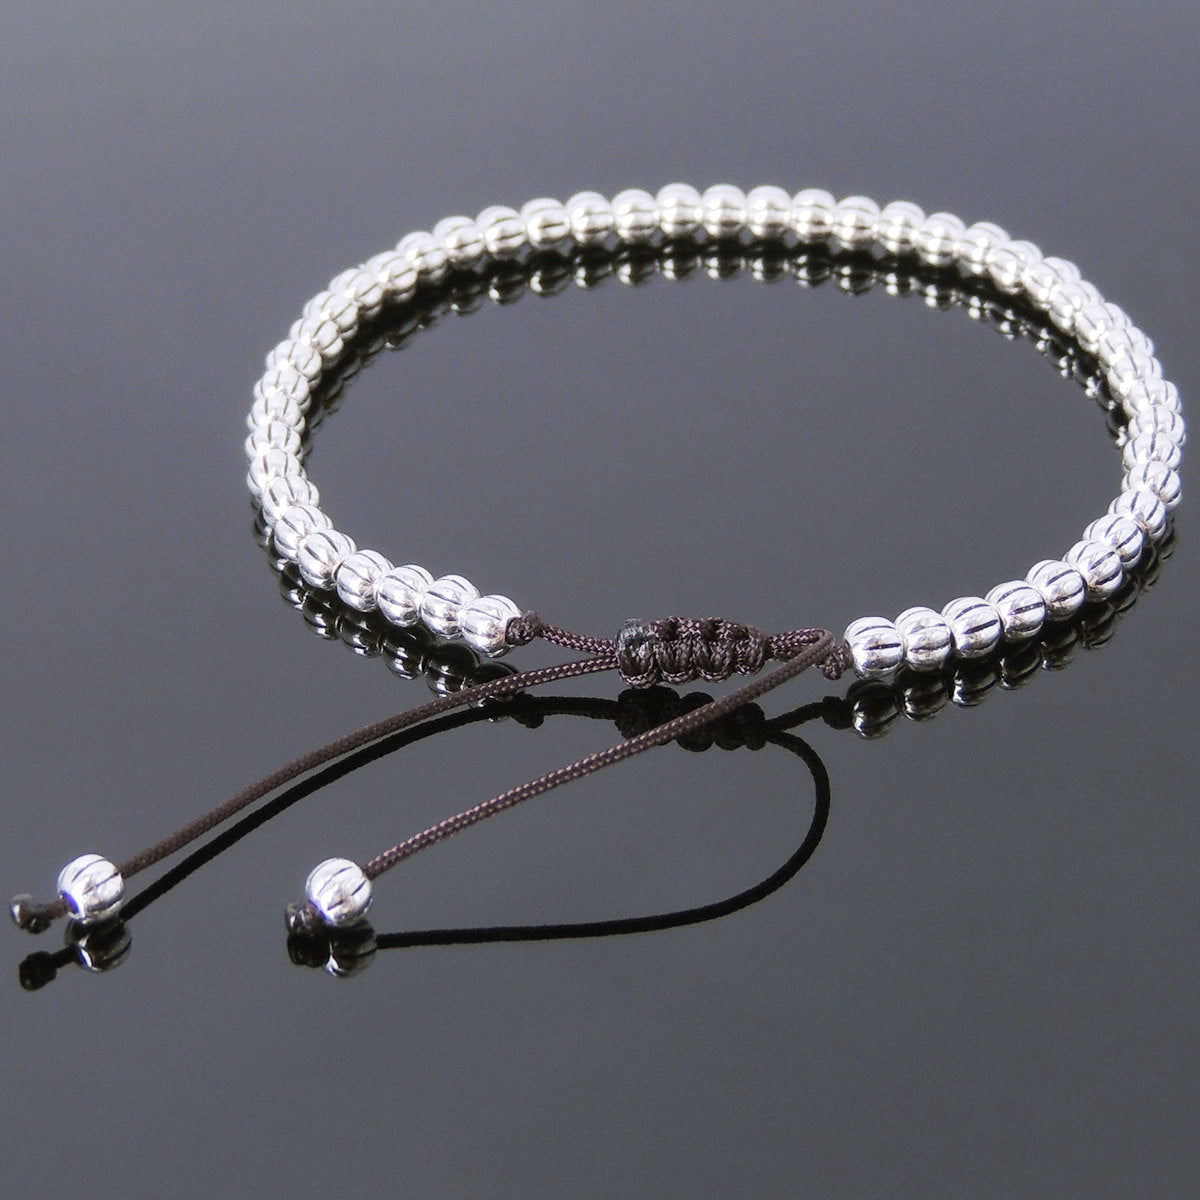 Adjustable Braided Healing Bracelet with S925 Sterling Silver Artisan Beads - Handmade by Gem & Silver BR696